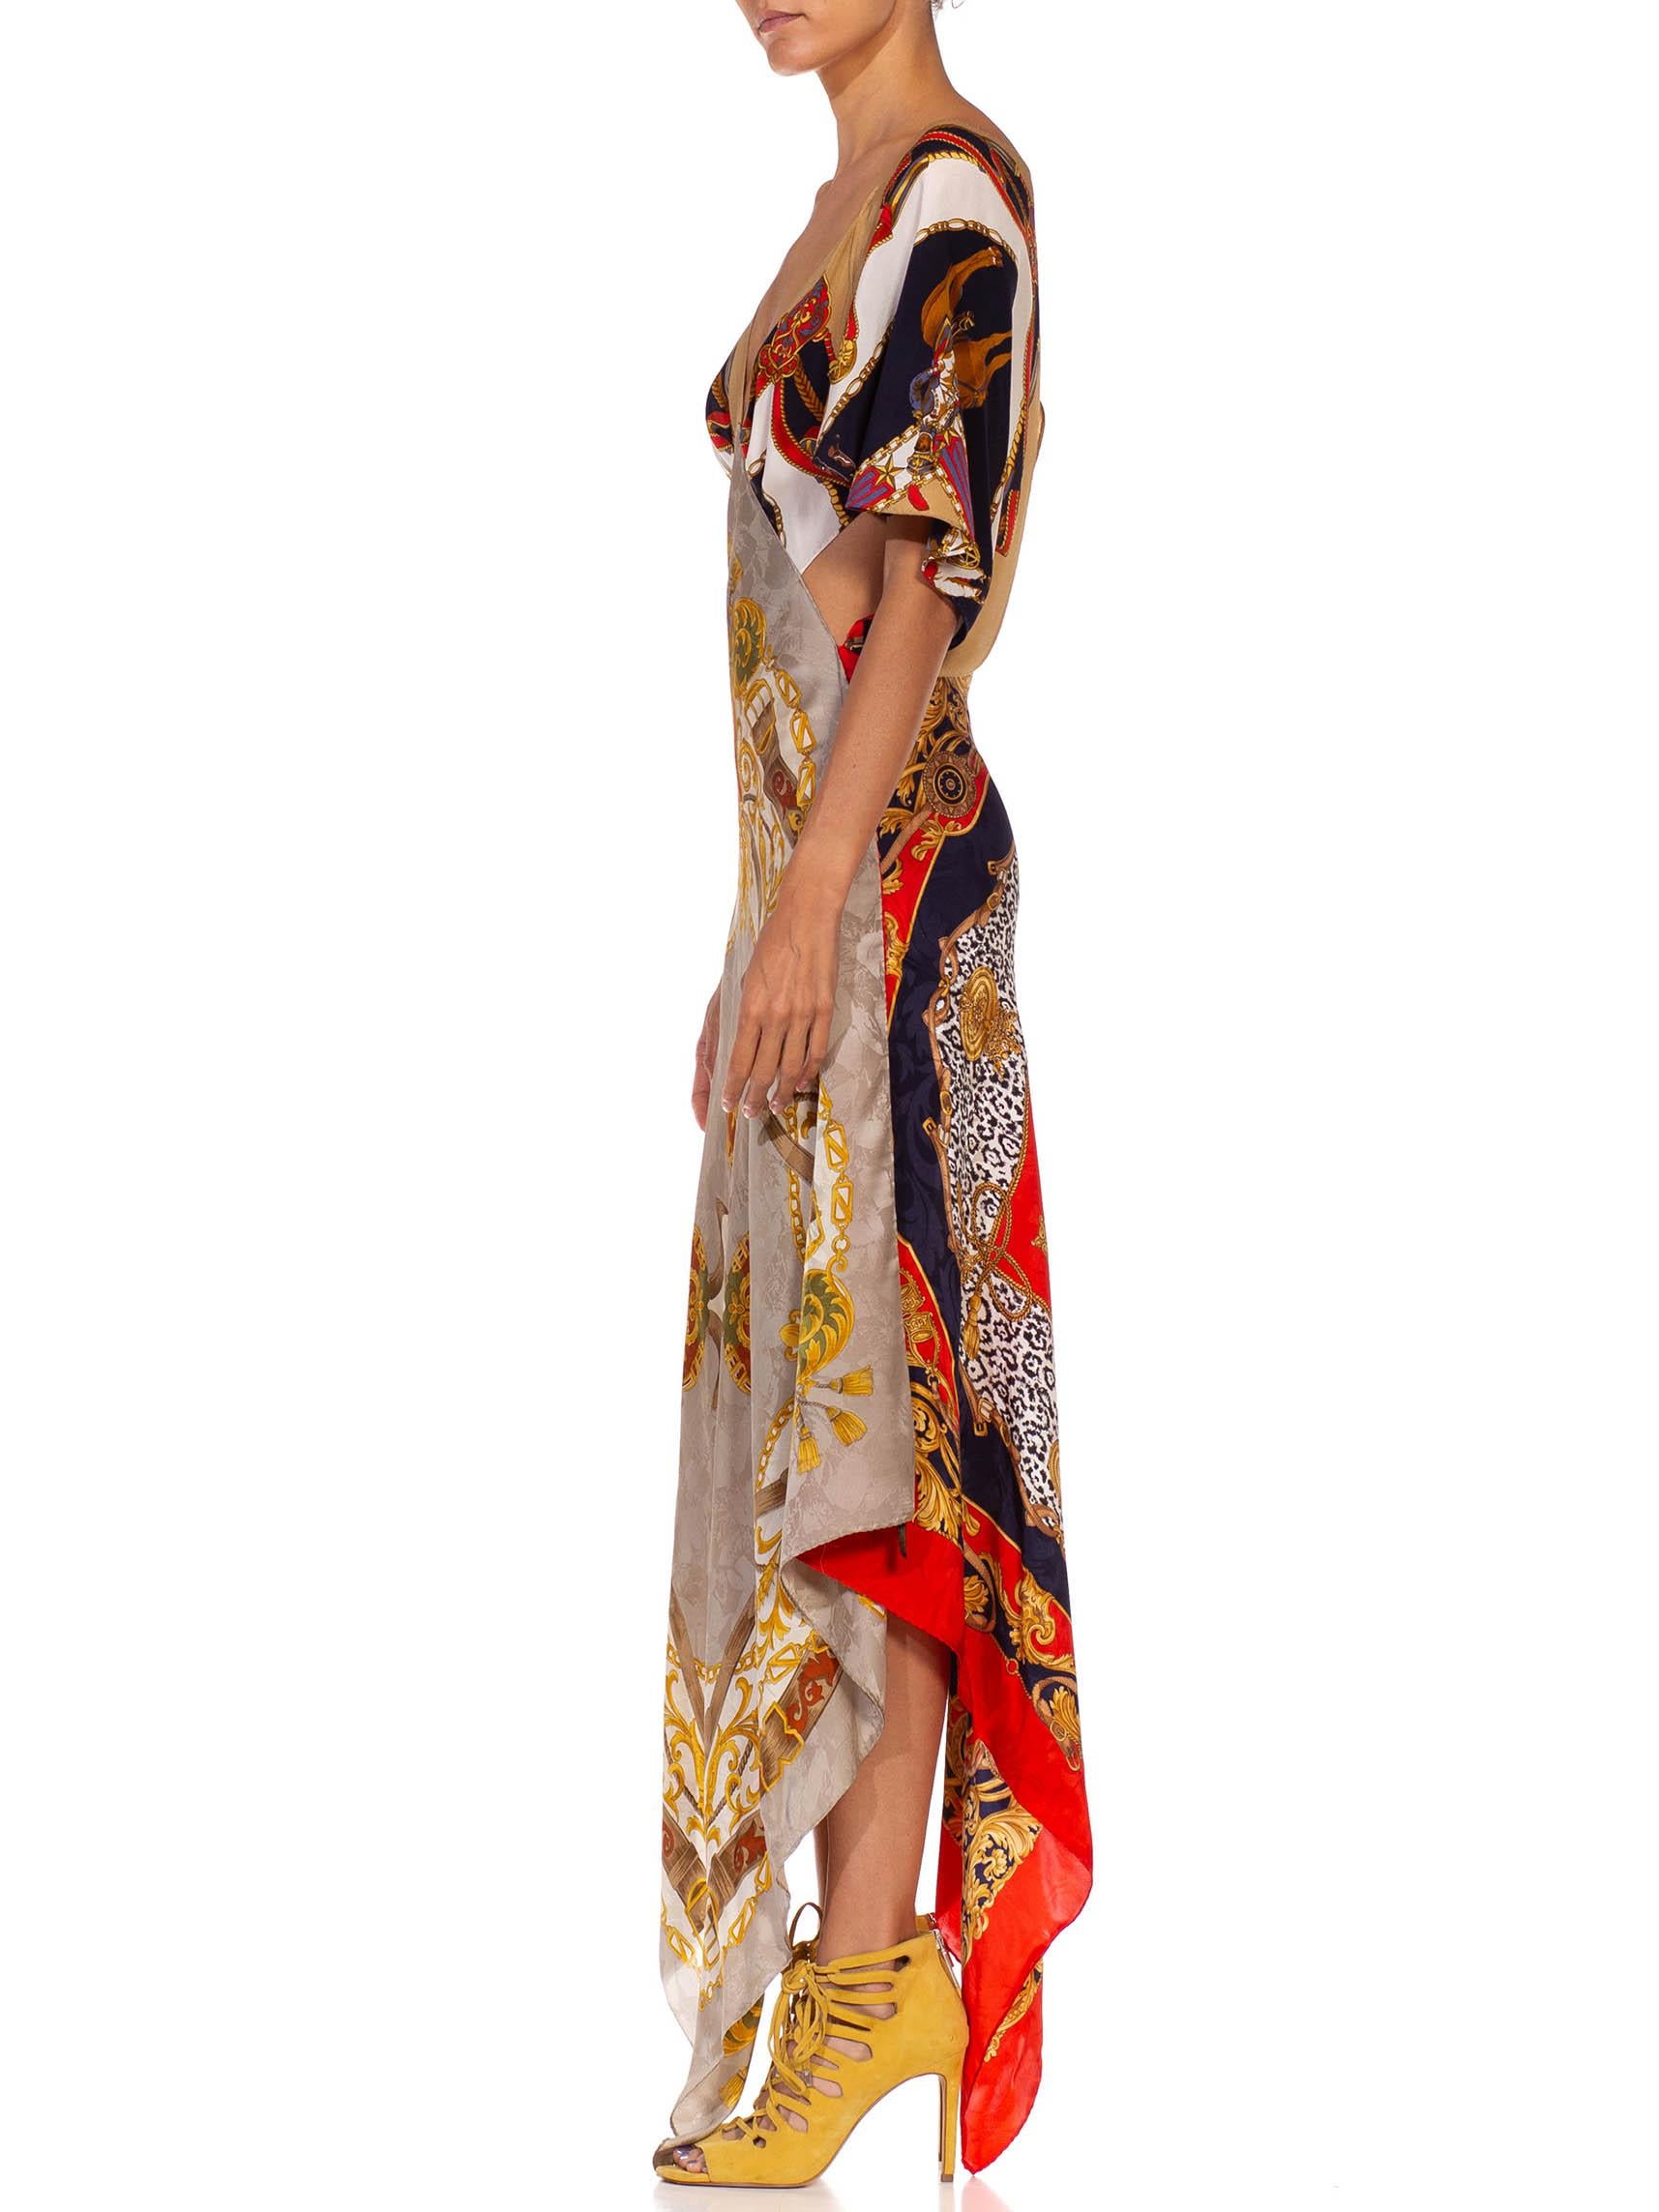 MORPHEW COLLECTION Gold Versace Style Print Silk Twill 3-Scarf Dress Made From Vintage Scarves
MORPHEW COLLECTION is made entirely by hand in our NYC Ateliér of rare antique materials sourced from around the globe. Our sustainable vintage materials